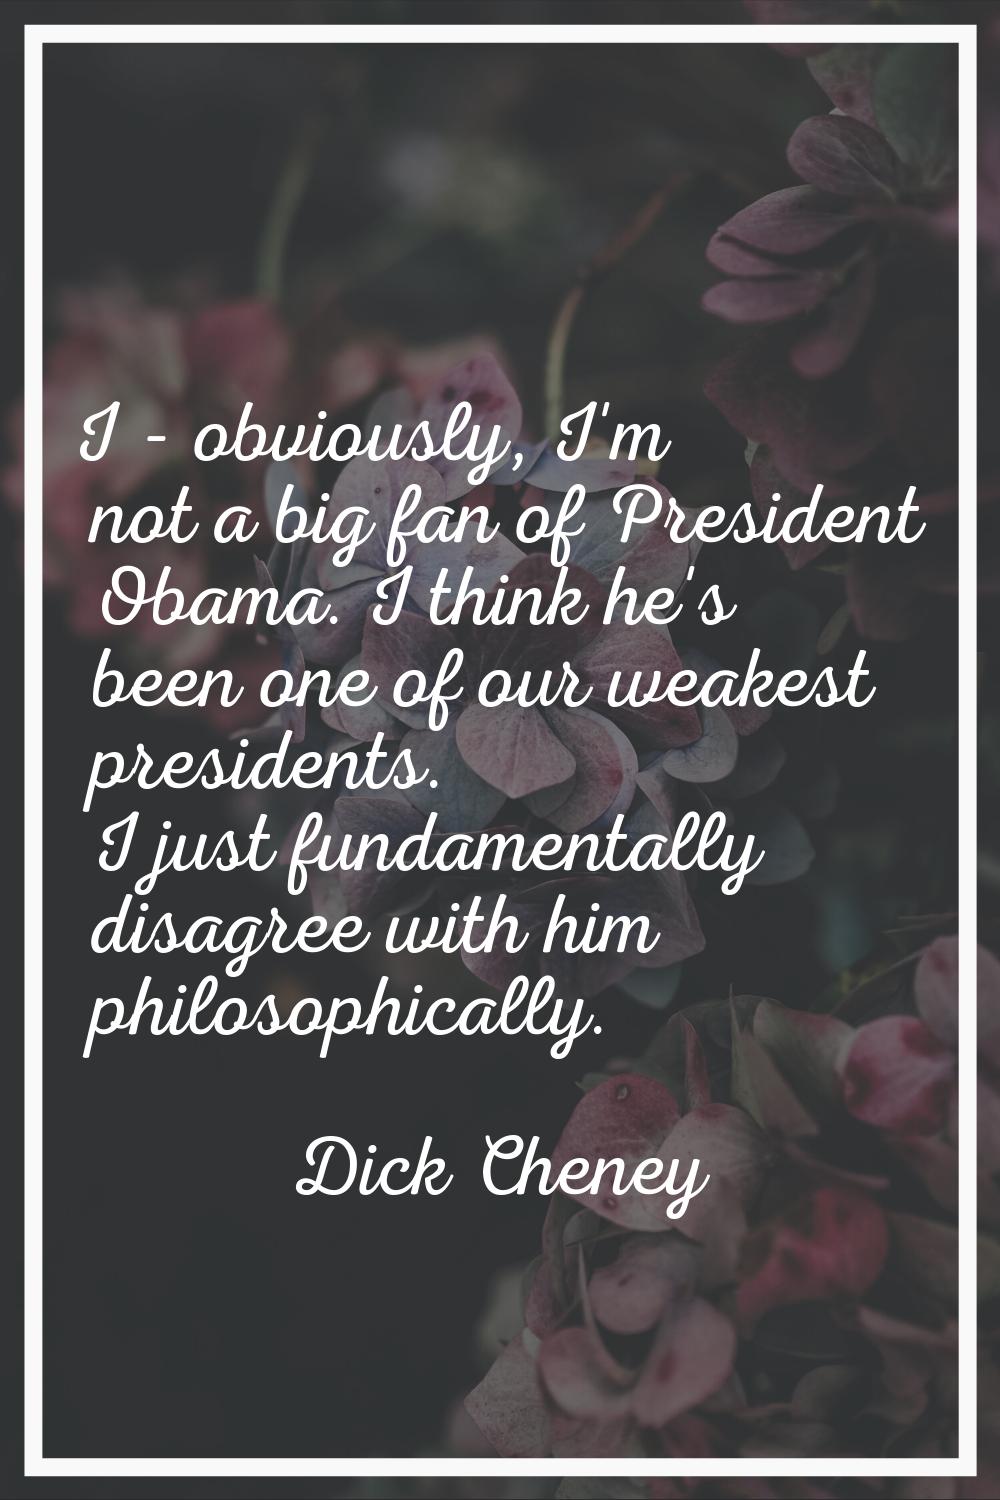 I - obviously, I'm not a big fan of President Obama. I think he's been one of our weakest president